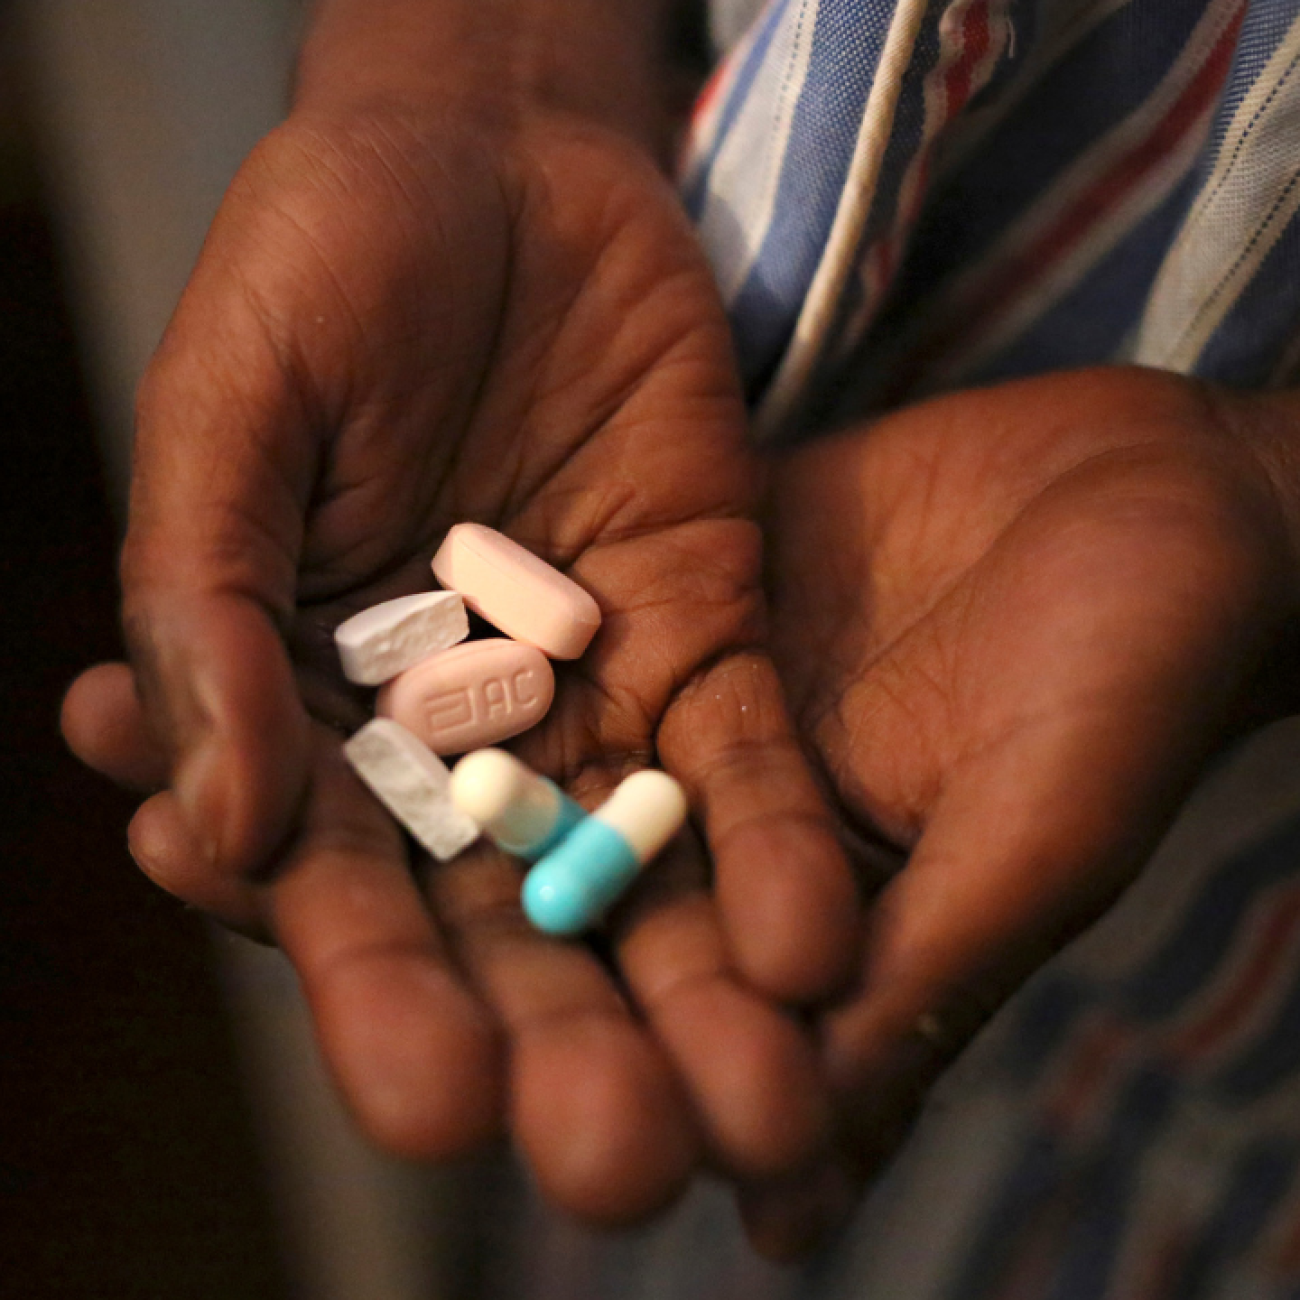 A close-upu image of a nine-year-old boy's hands holding antiretroviral (ARV) pills prescribed for HIV infection at Nkosi's Haven, in Johannesburg, South Africa.